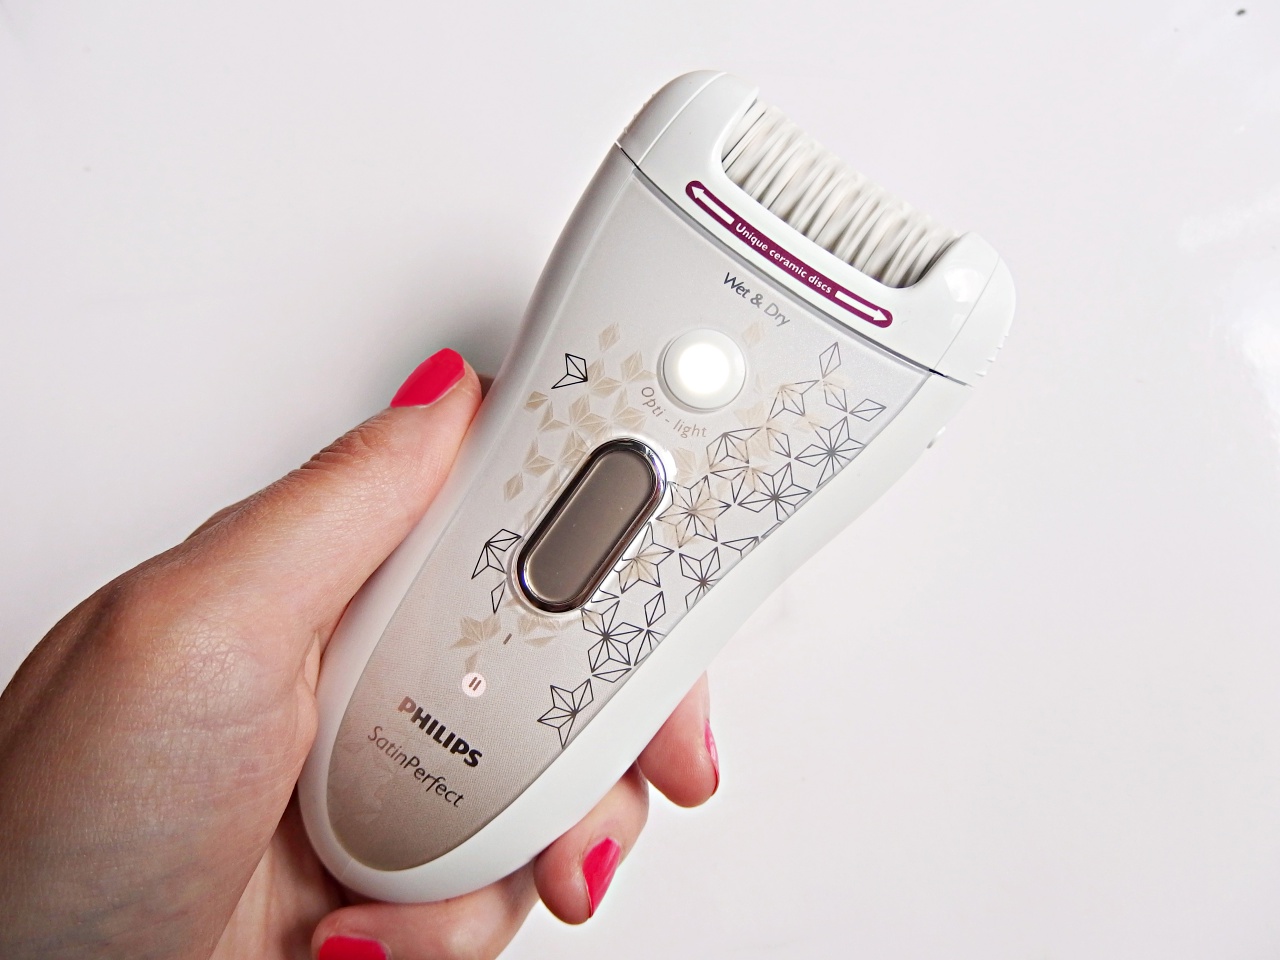 Reserve Rustic Become aware Philips SatinPerfect Wet & Dry Epilator Review